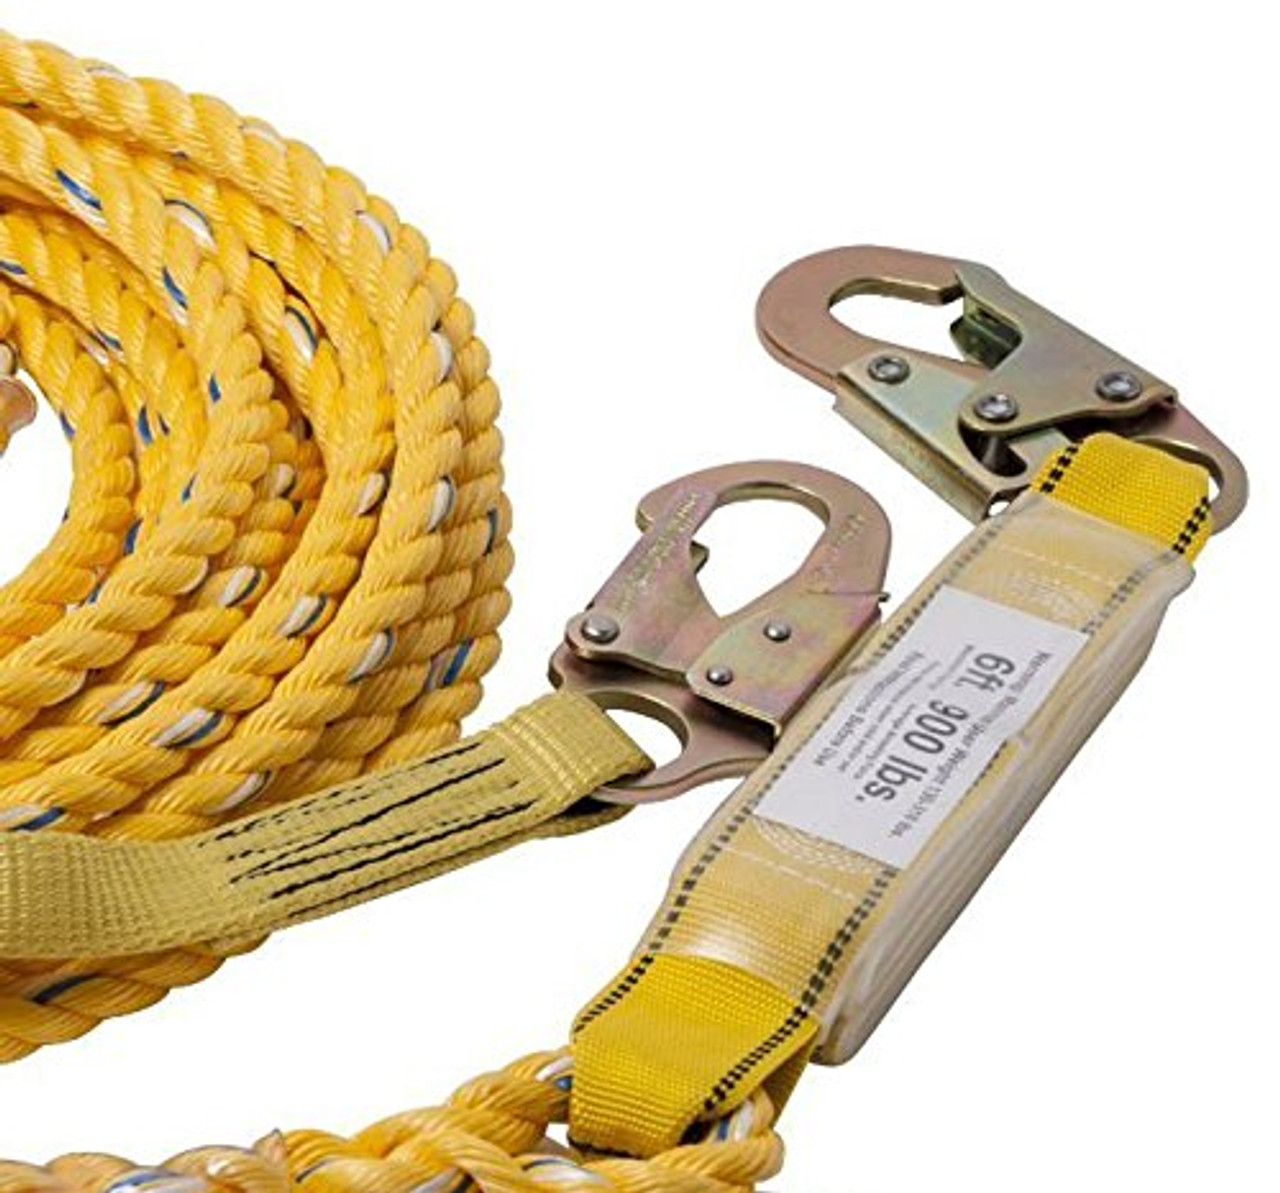 Rope Lock Device - Vertical Solutions Company